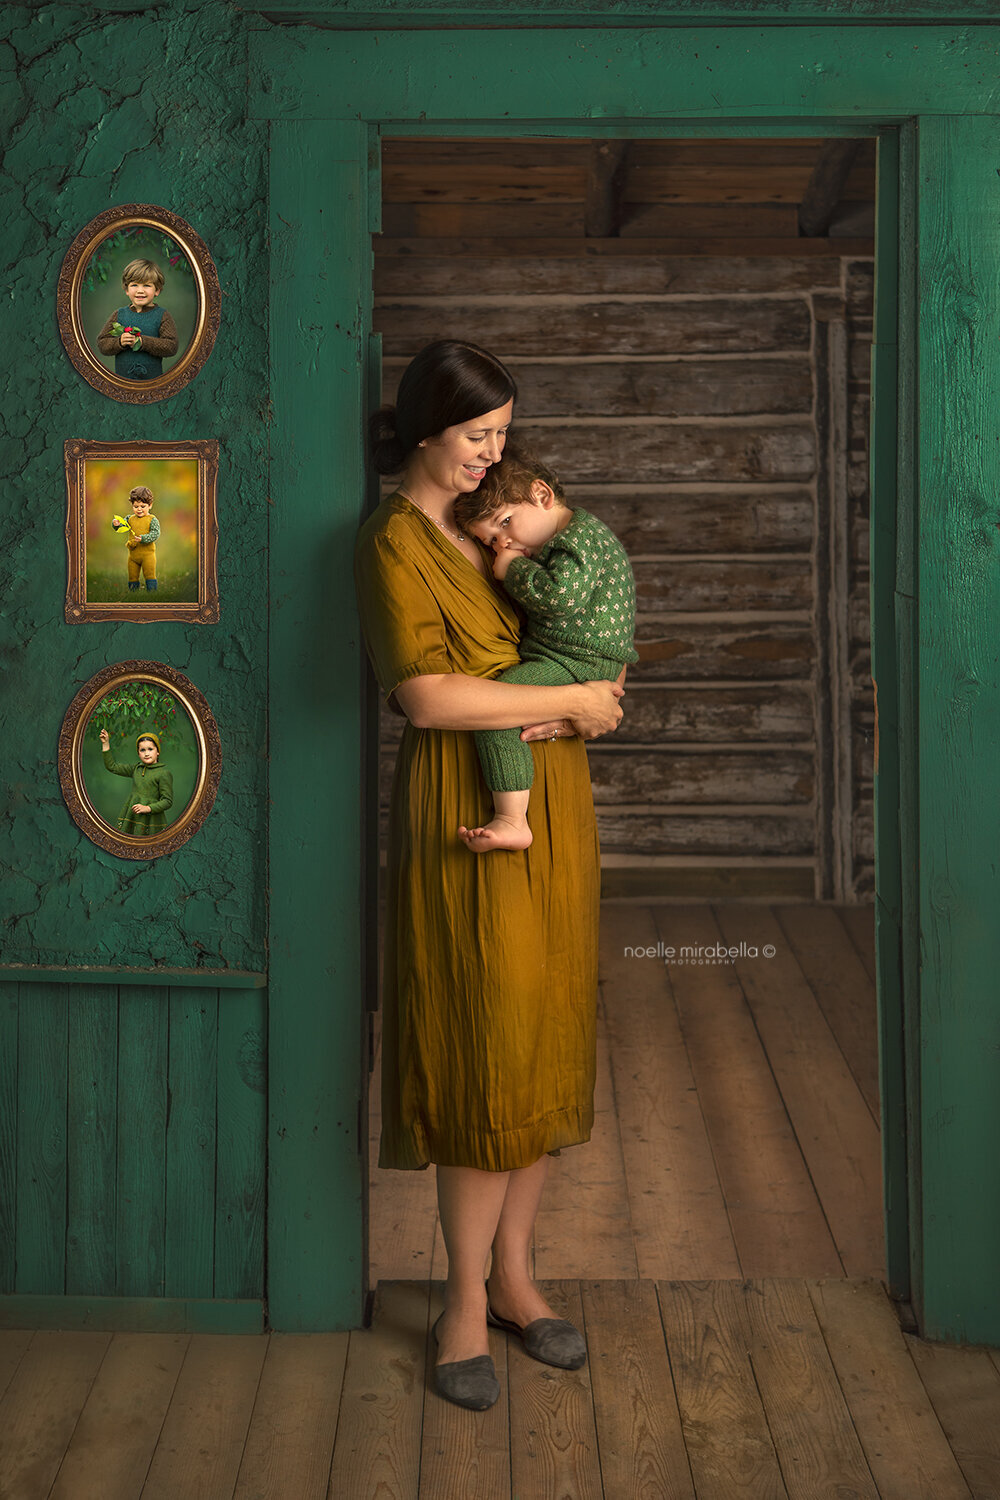 Mom snuggling her toddler in her arms in doorway of old teal house.